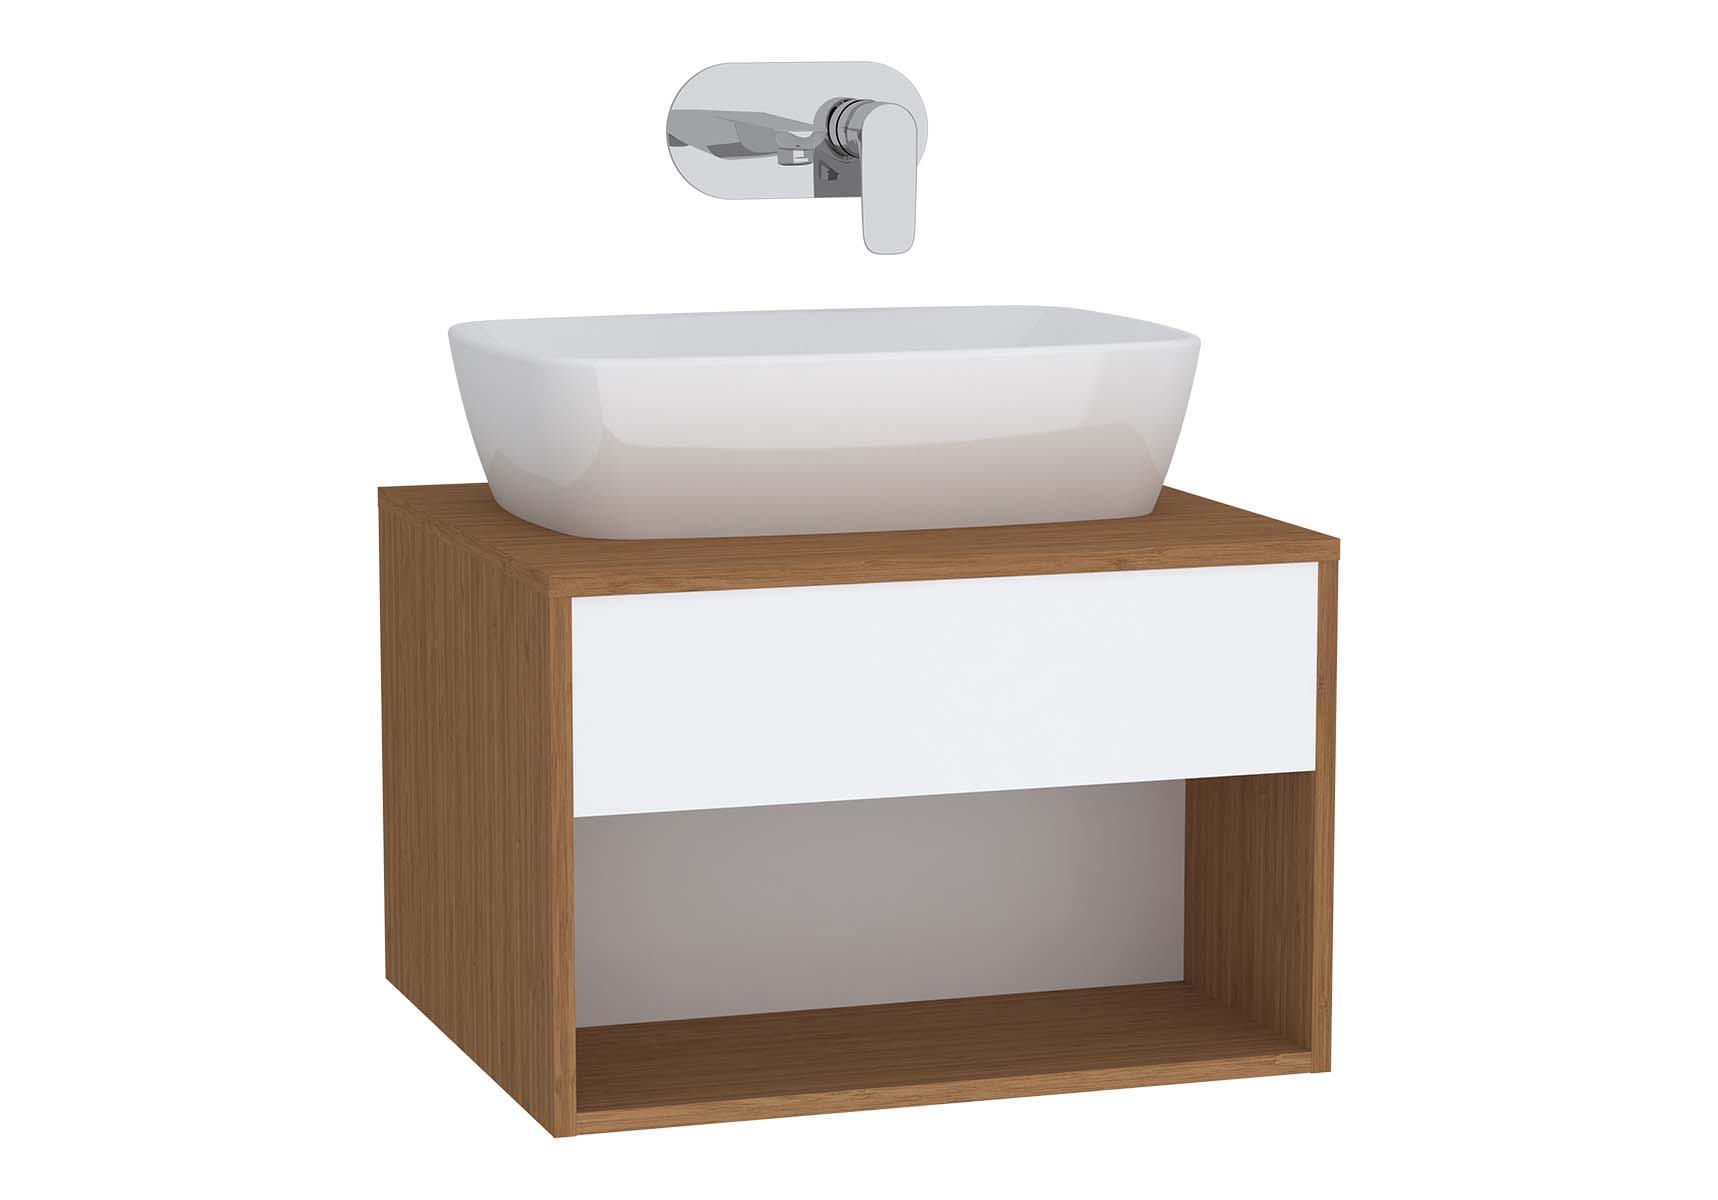 Integra Hotel Unit, 60 cm, for countertop basins, with 53 cm depth, White High Gloss & Bamboo